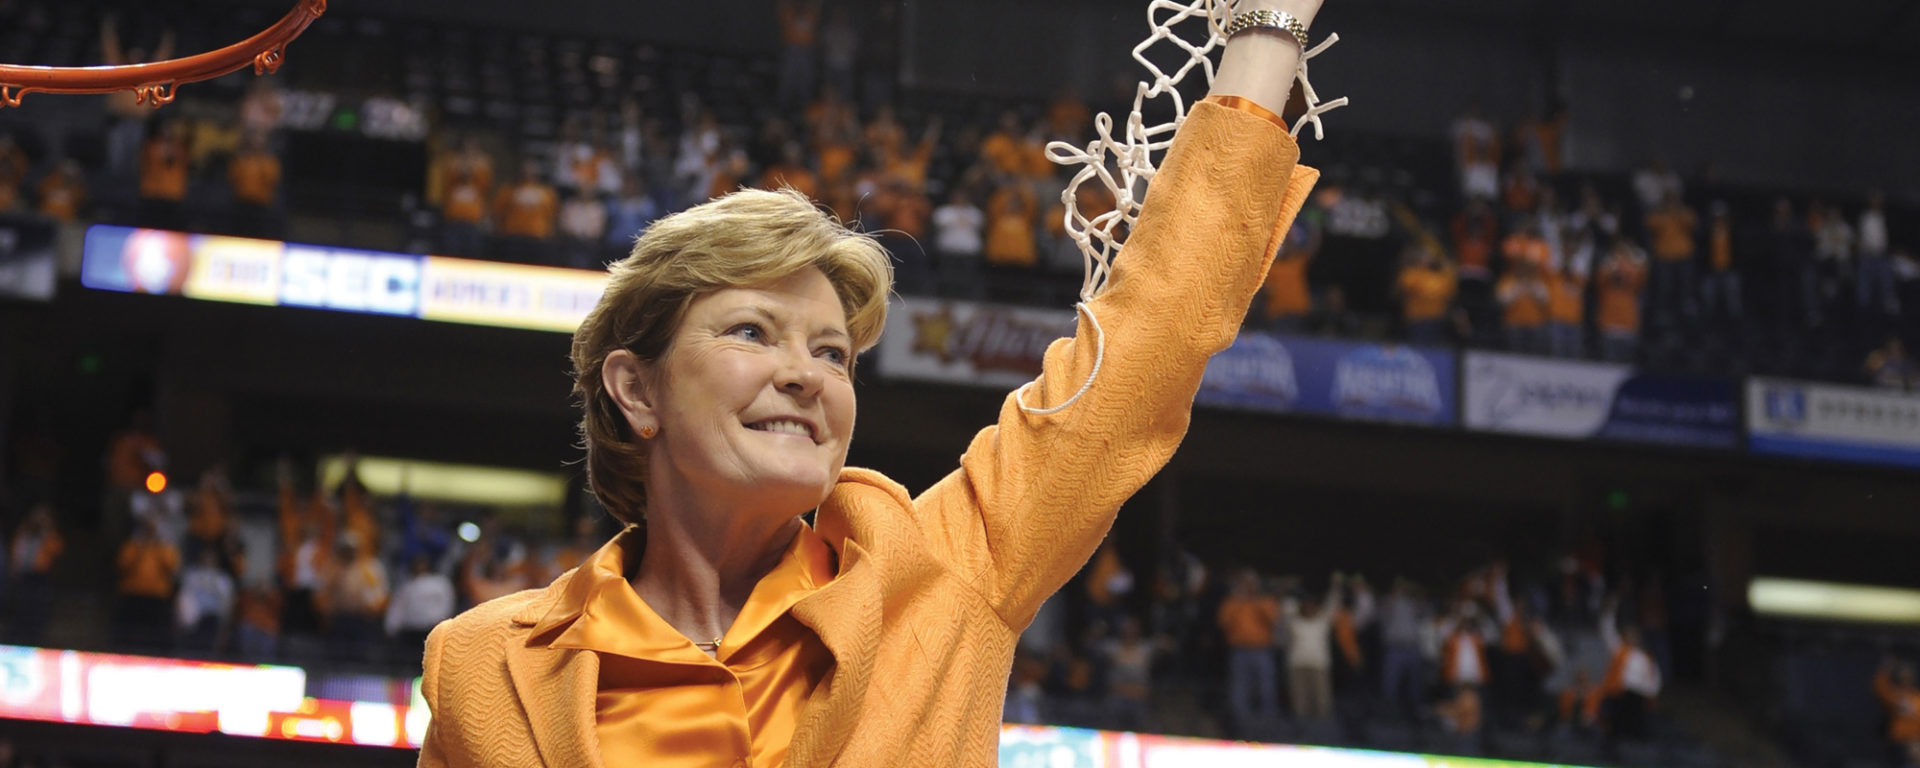 Pat Summitt cutting down the net after the Lady Vols 2008 victory